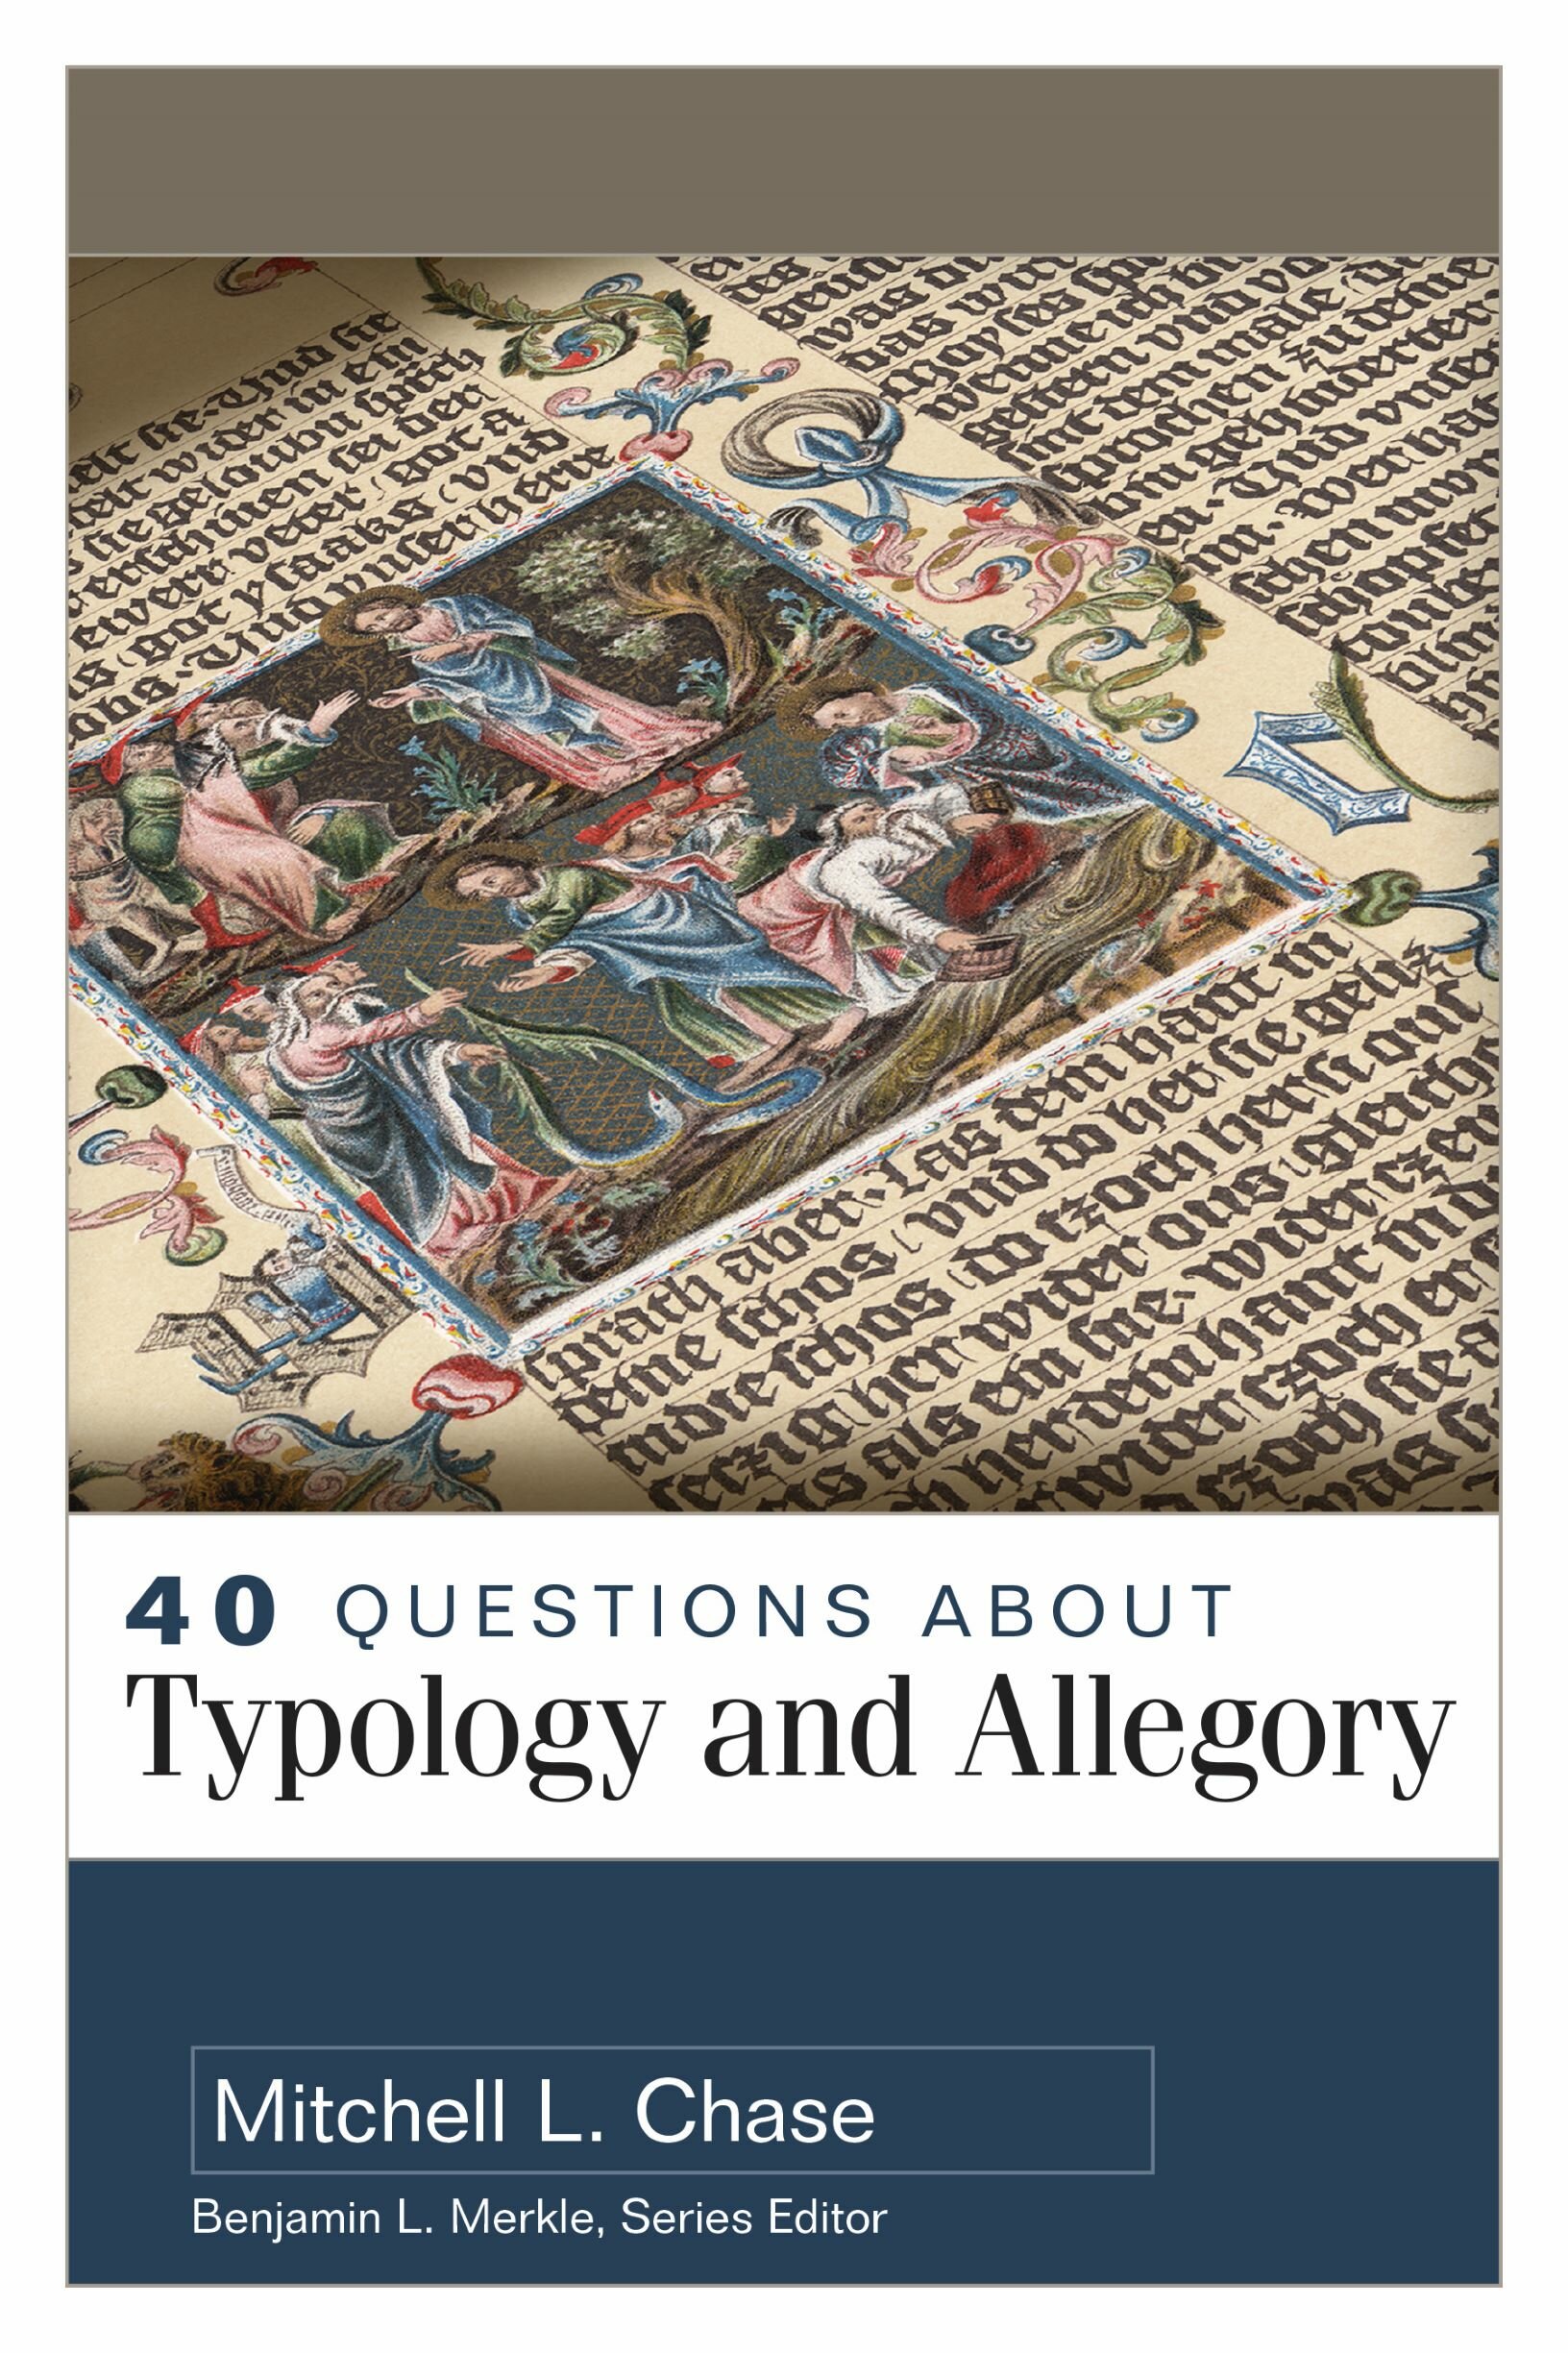 40 Questions about Typology and Allegory (40 Questions Series)